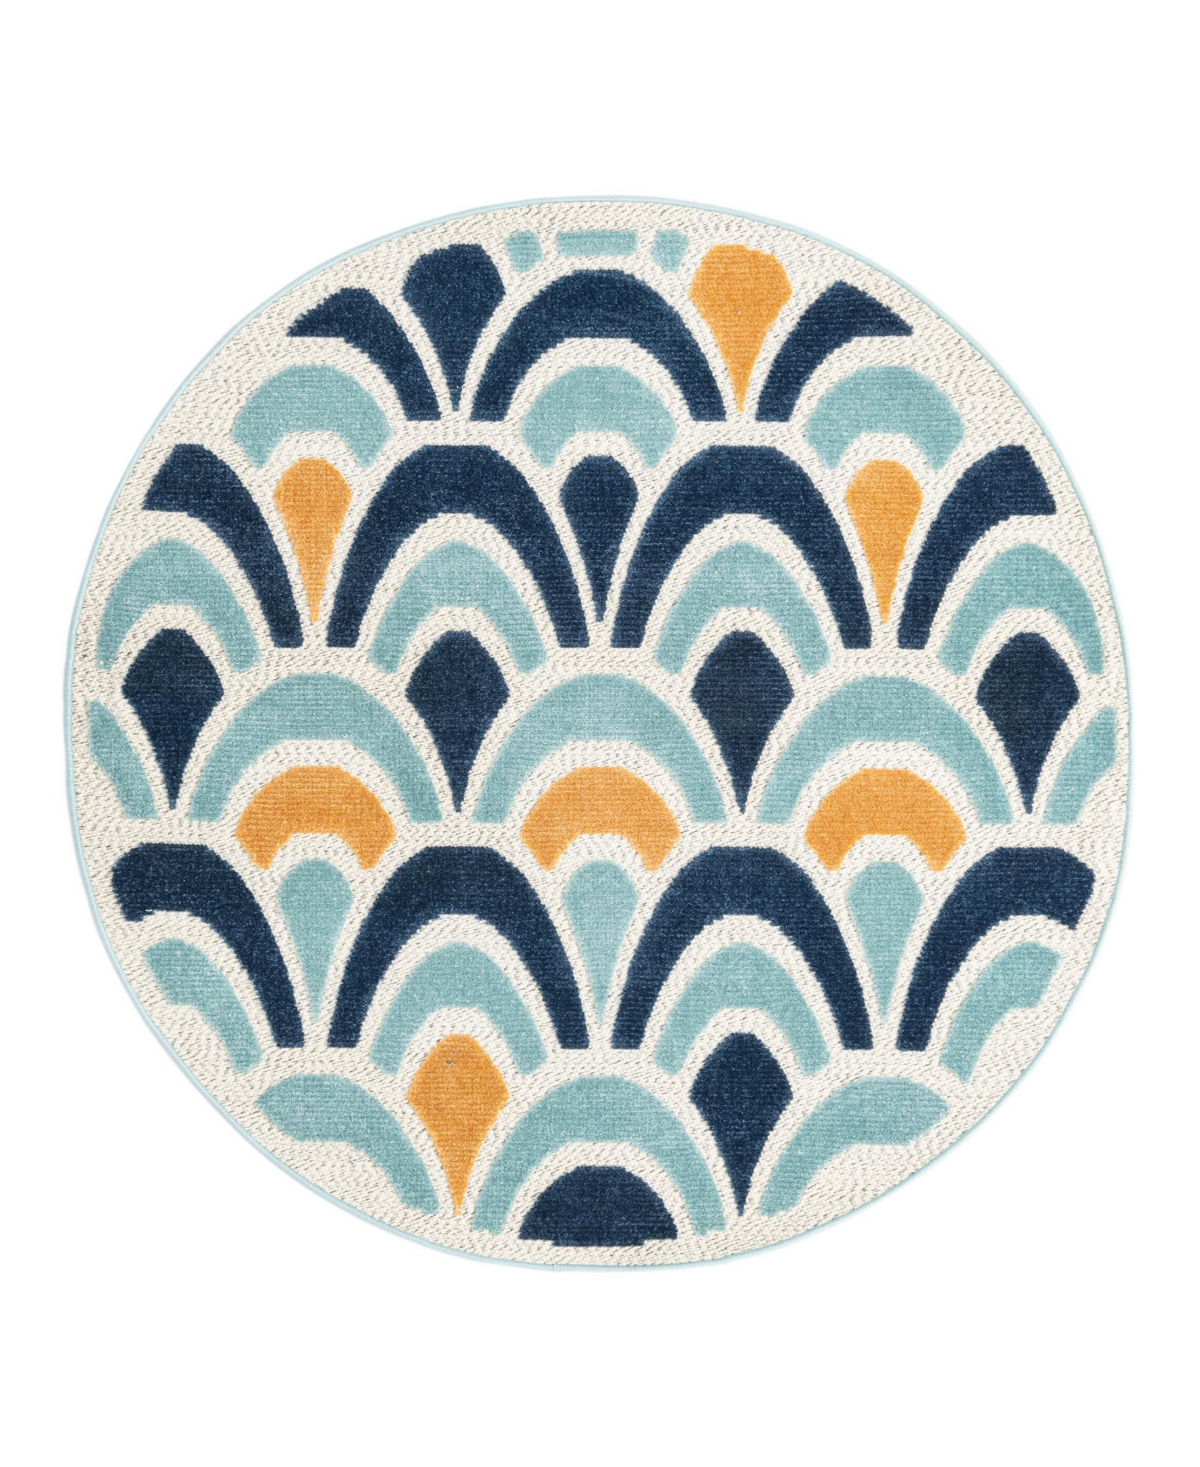 Bayshore Home Cayes Outdoor High-low Pile Cay-10 5'3" X 5'3" Round Area Rug In Blue